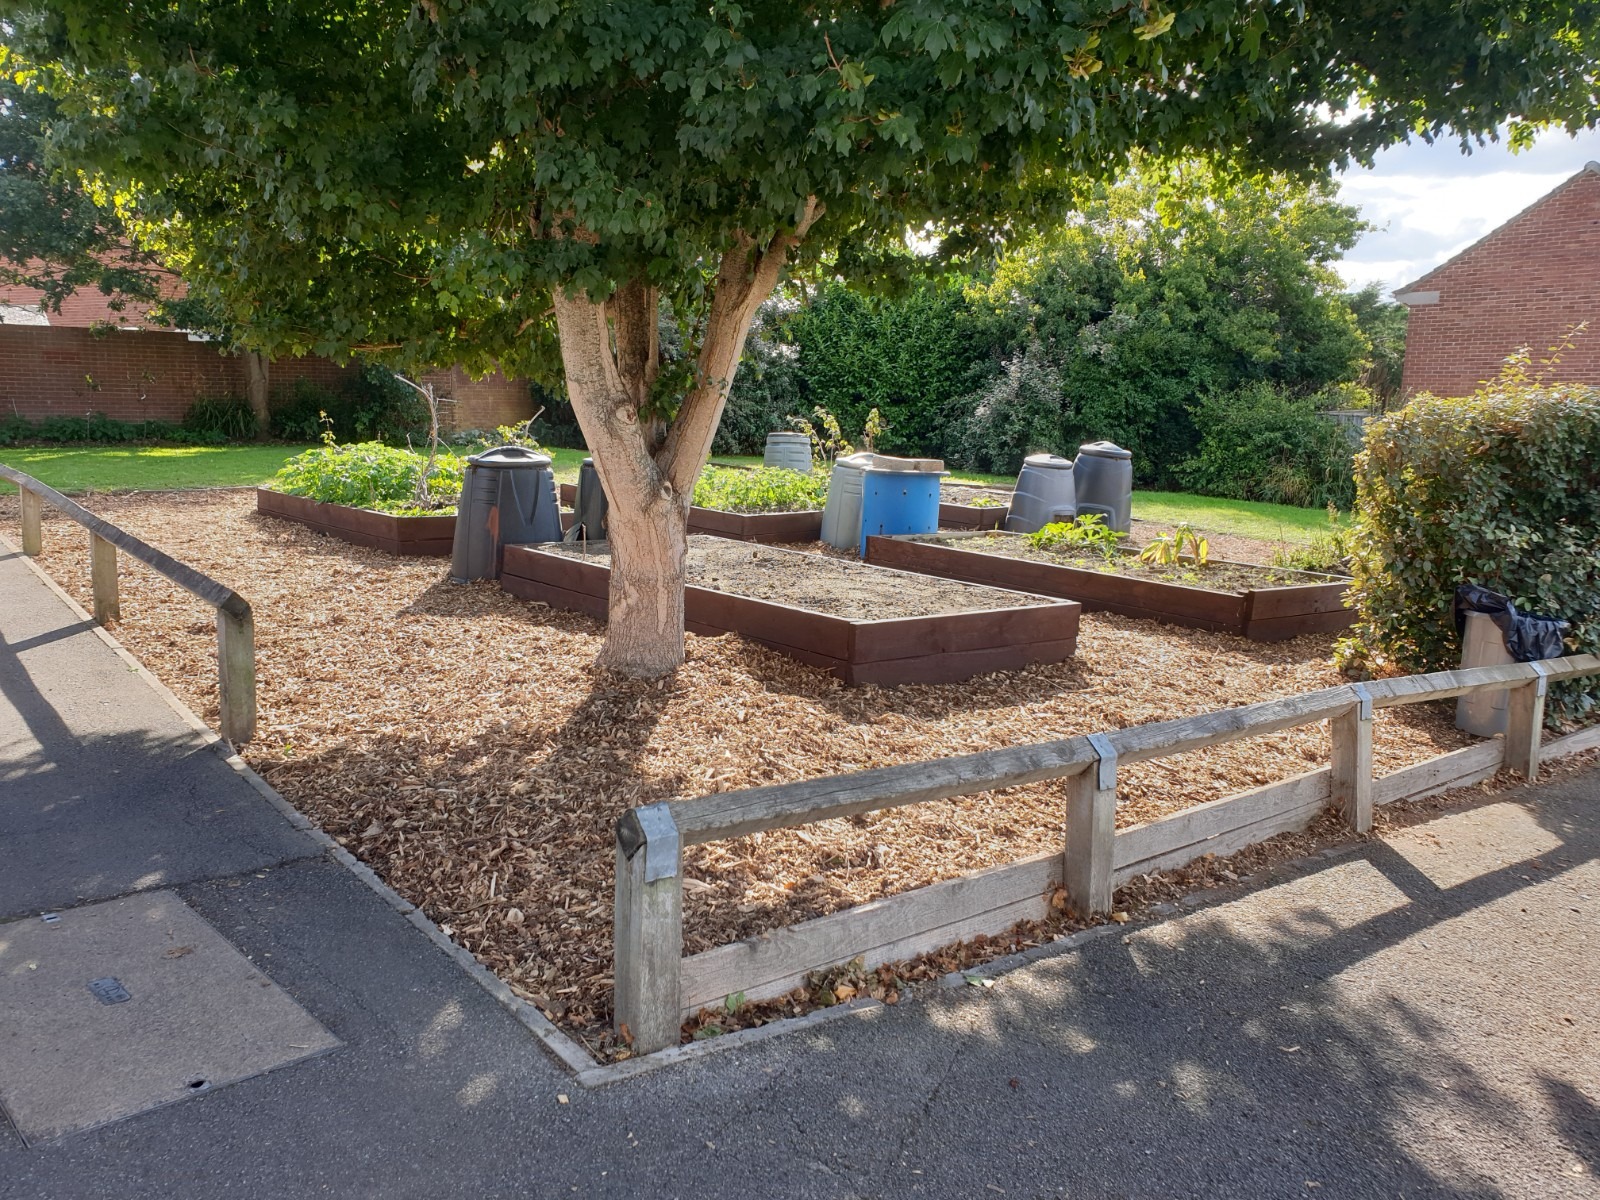 Newly refurbished planters at Studley Green Community Garden